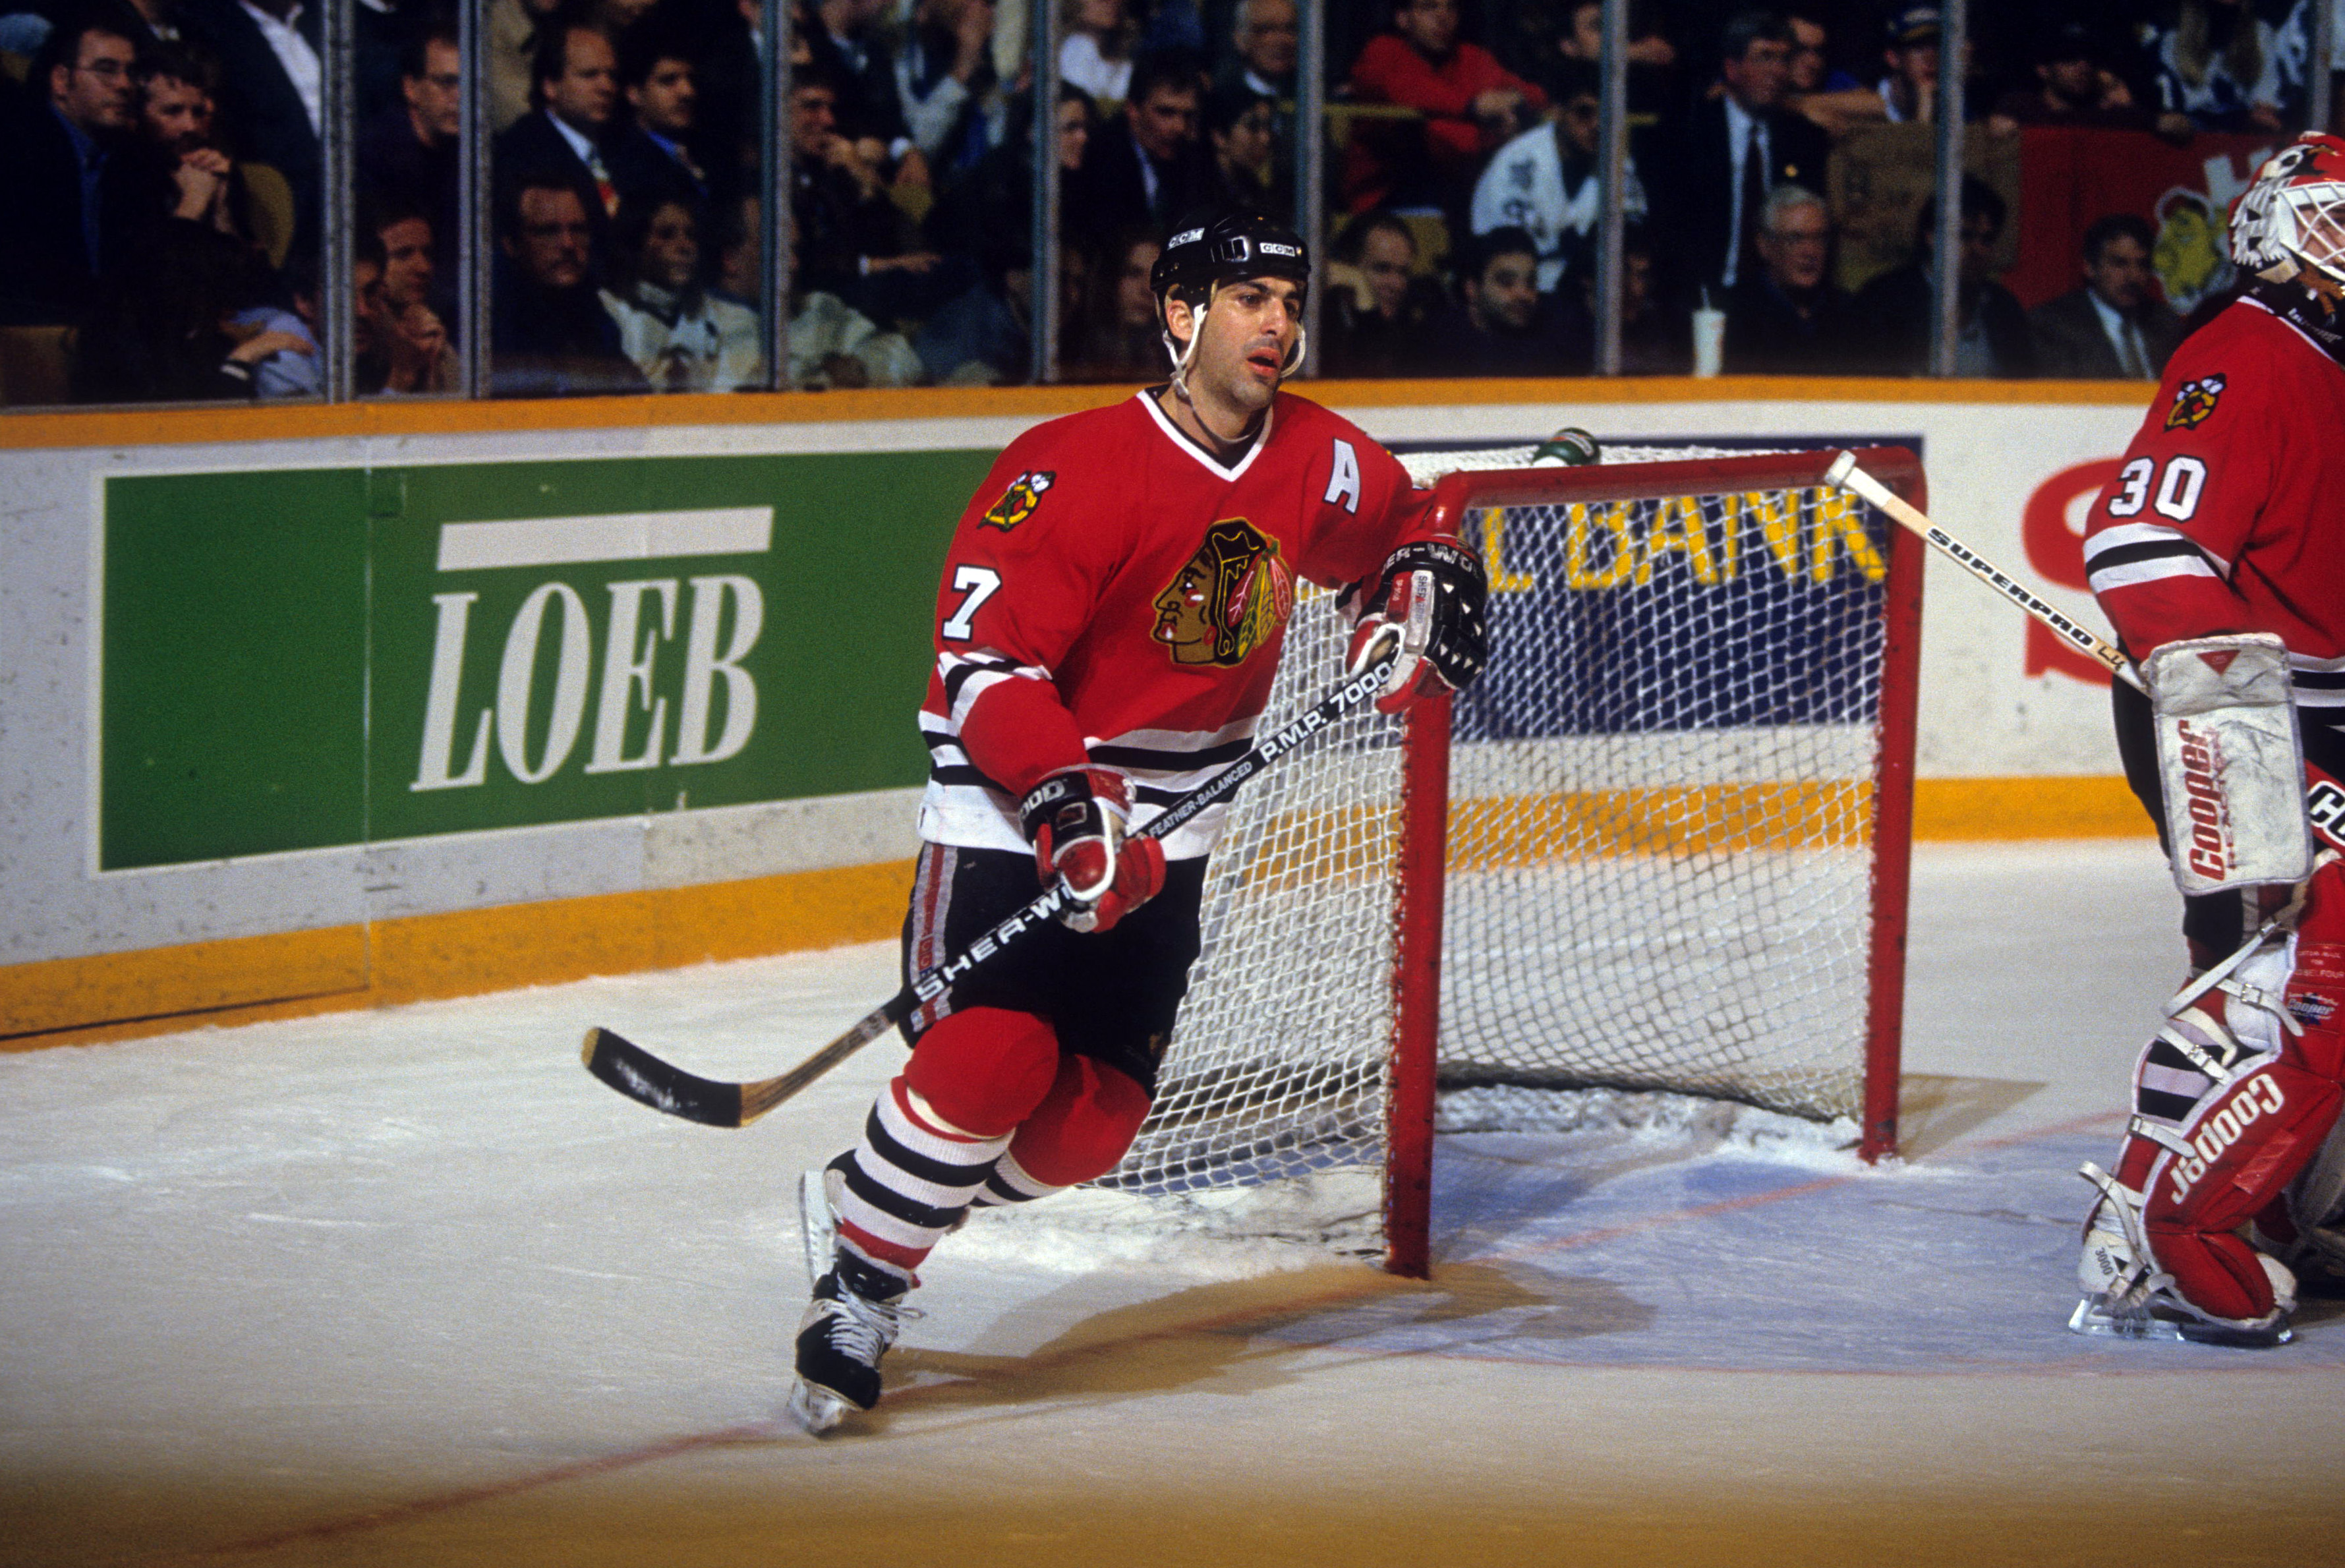 Blackhawks' Chris Chelios found out his number is being retired by Pearl Jam